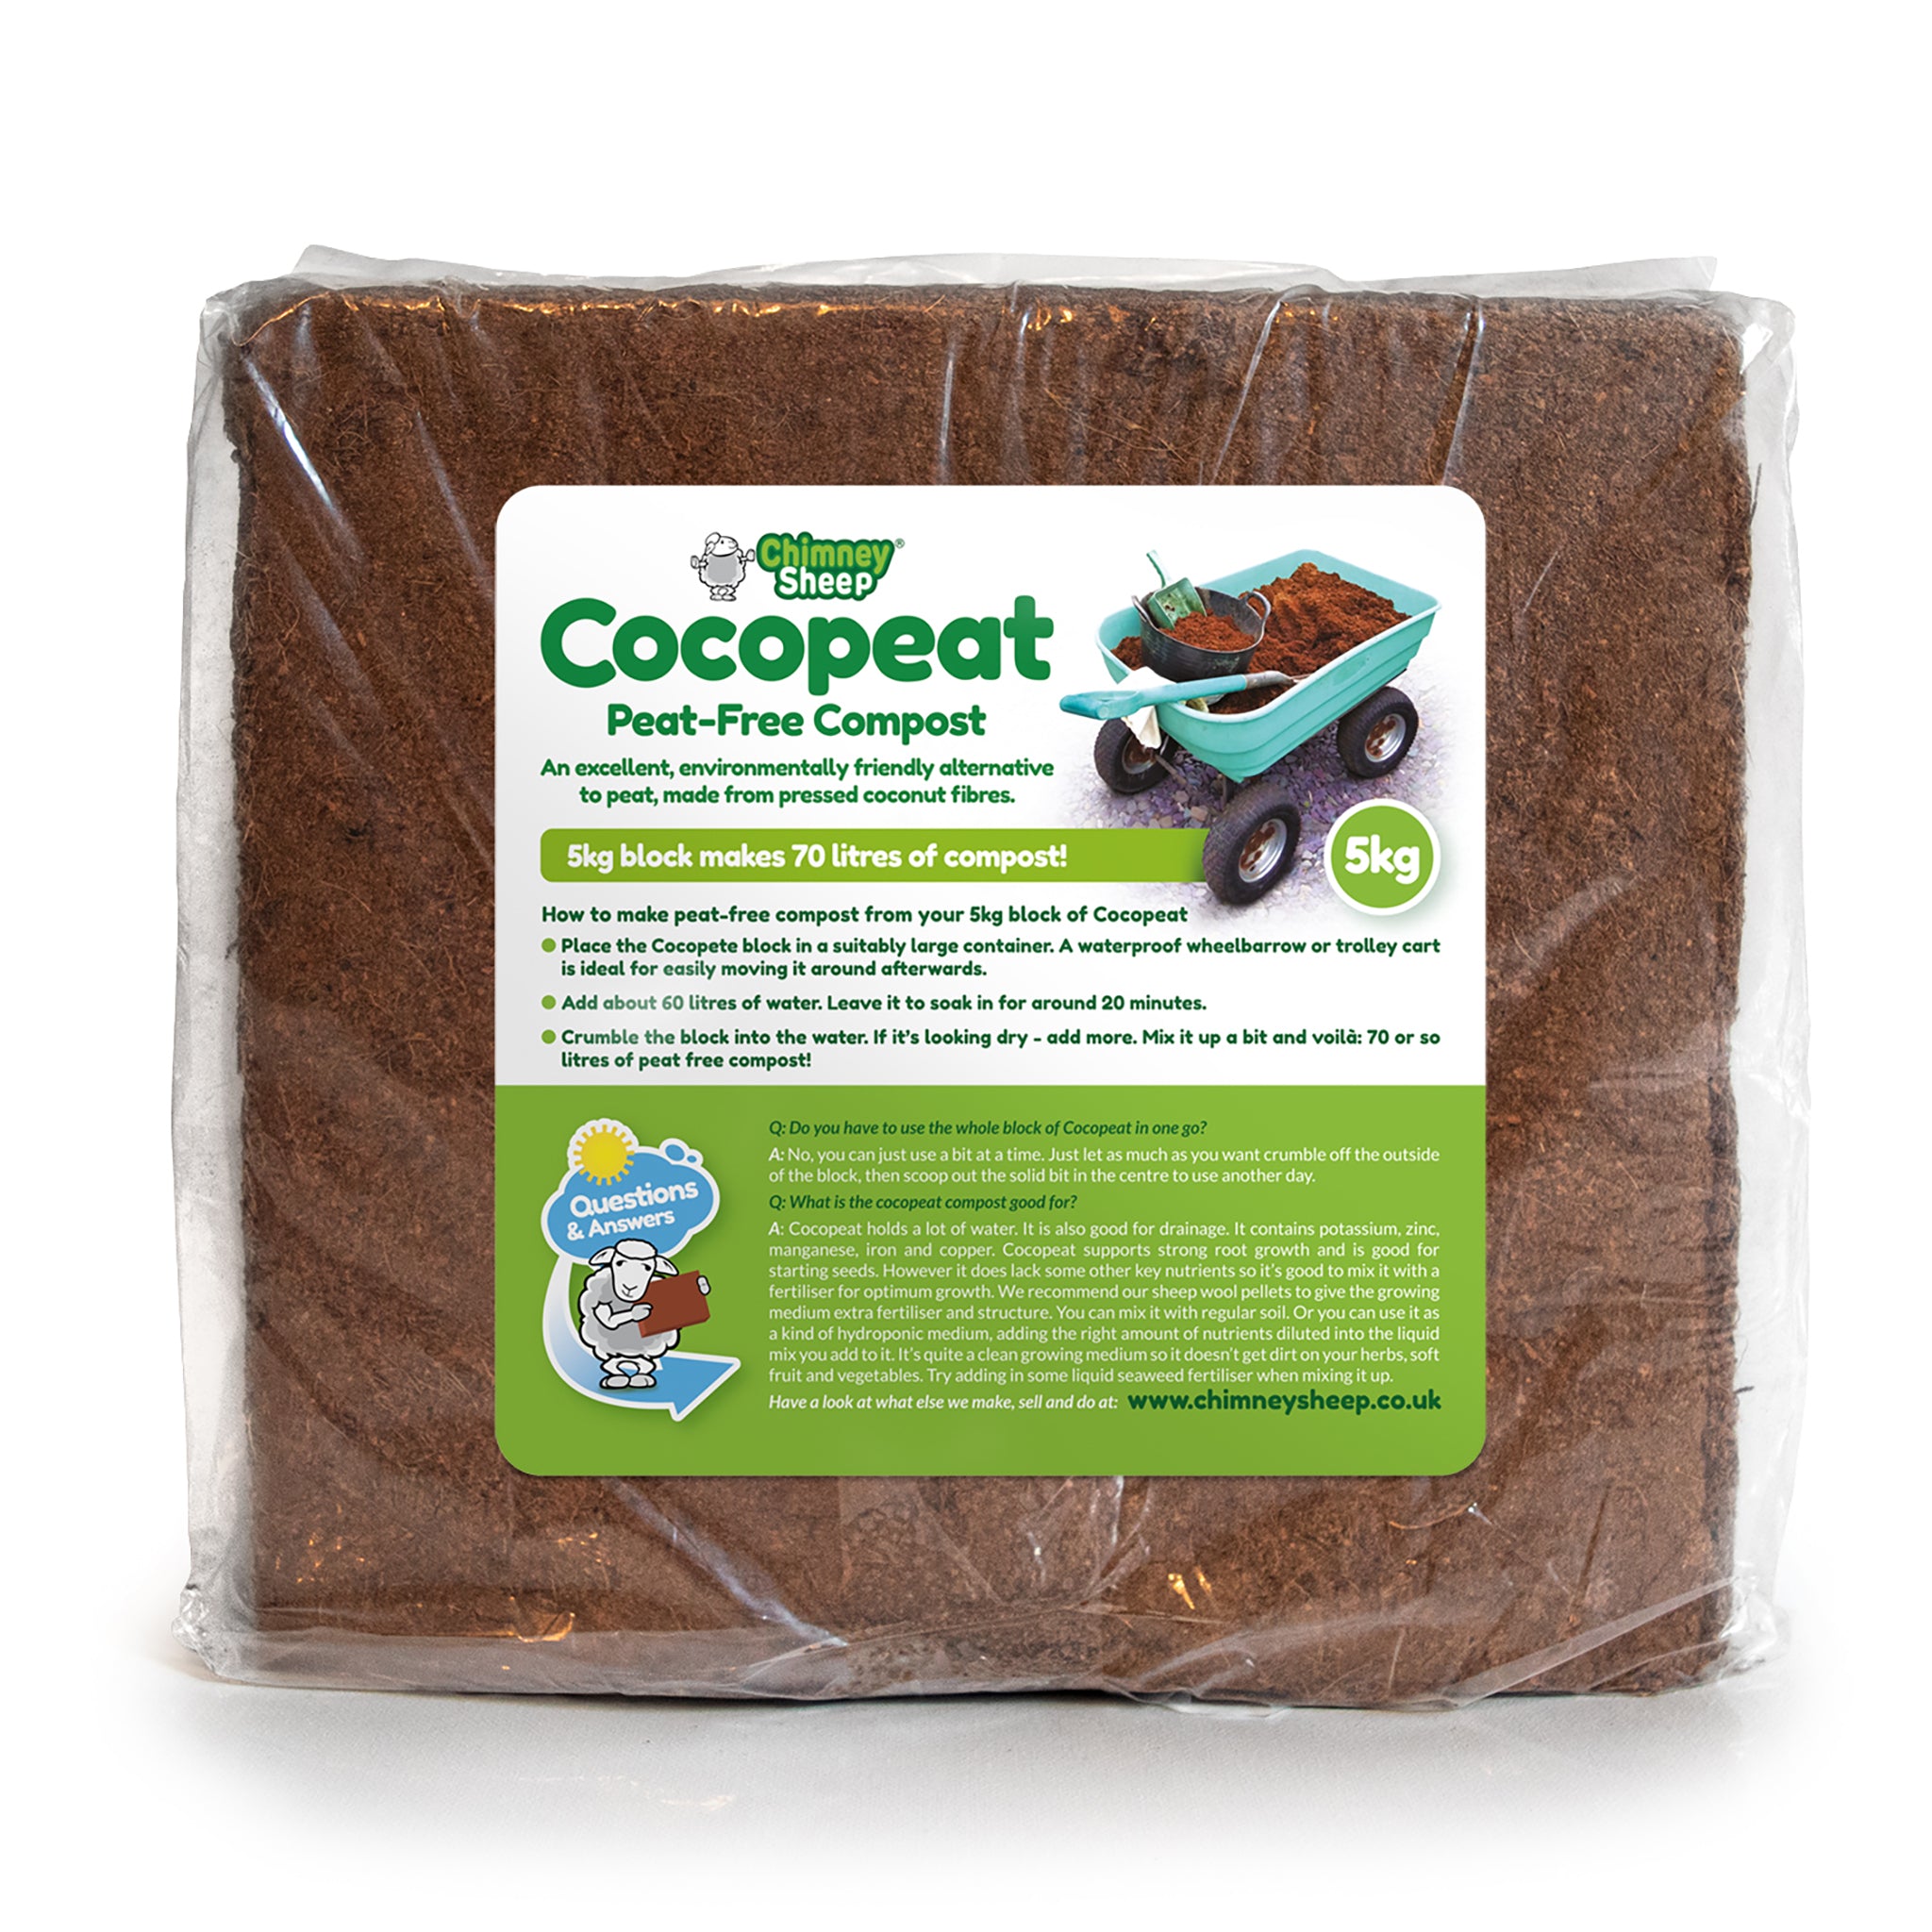 5kg block of cocopeat with image of cart full of 70 litres